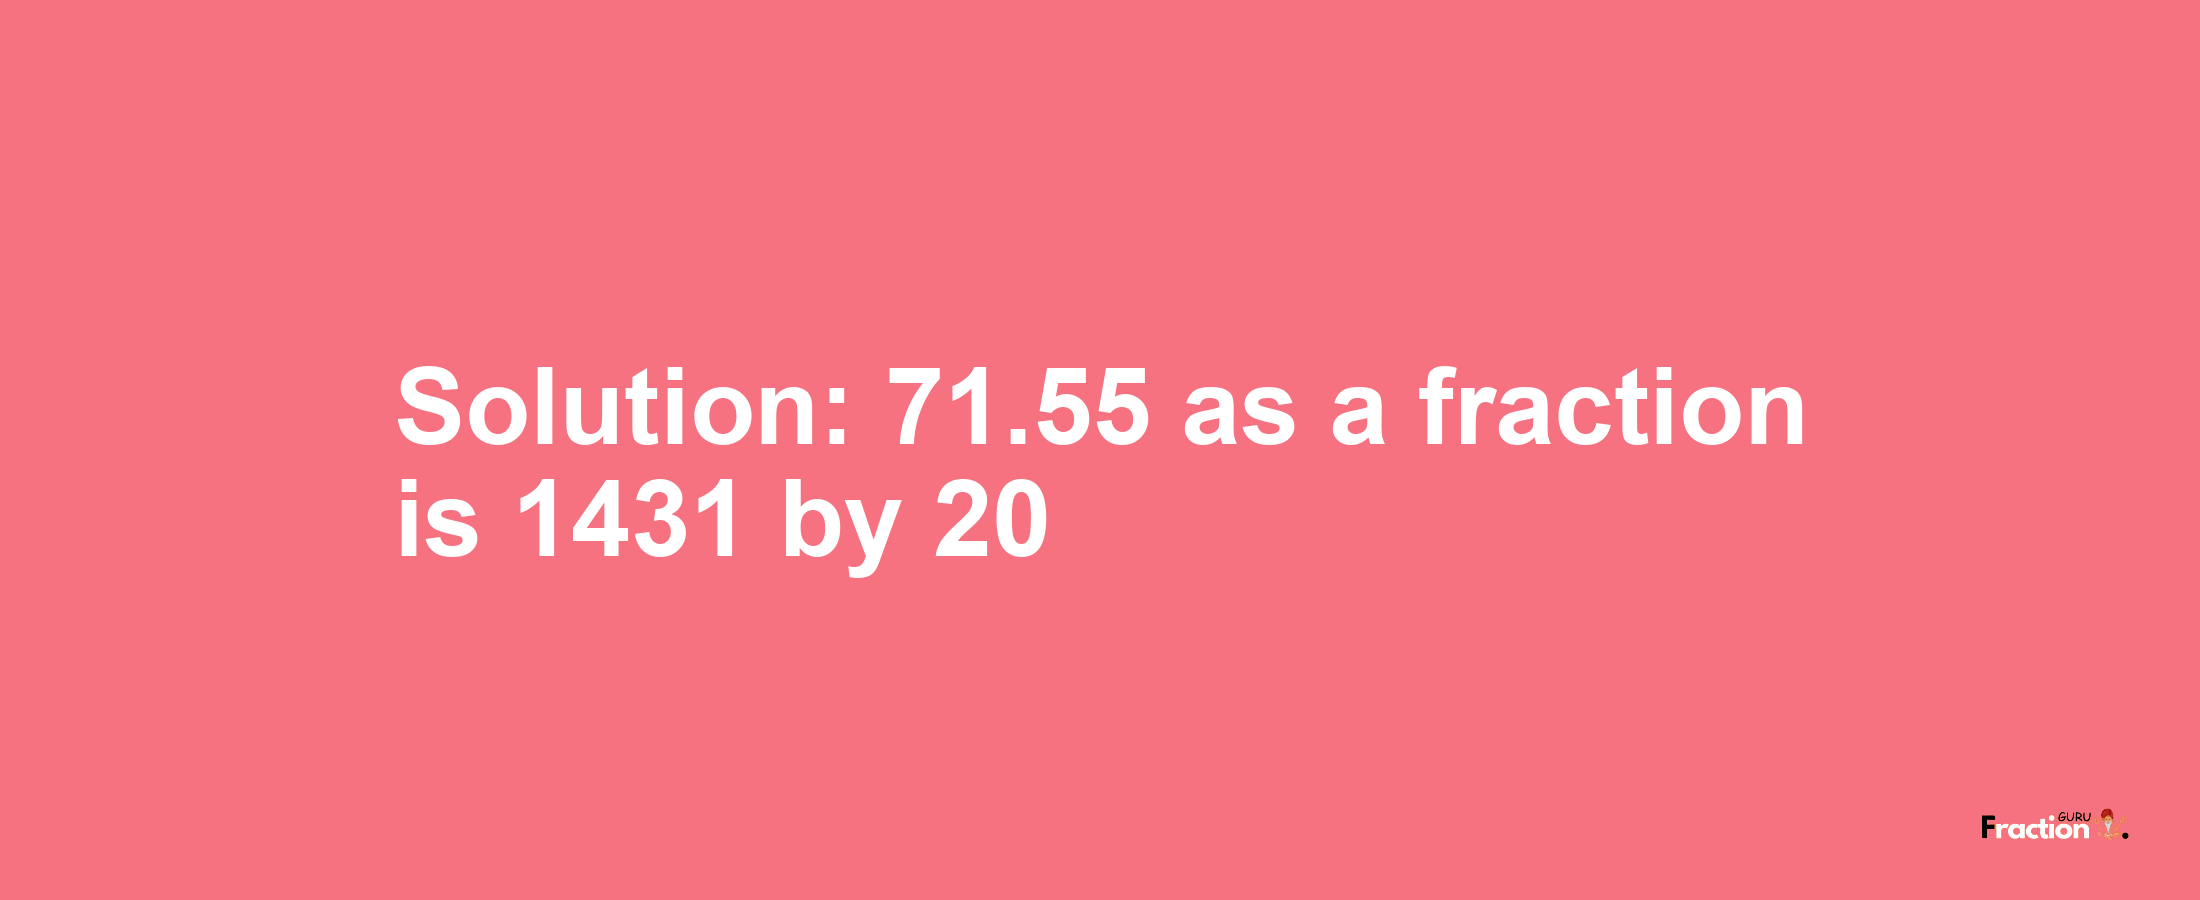 Solution:71.55 as a fraction is 1431/20